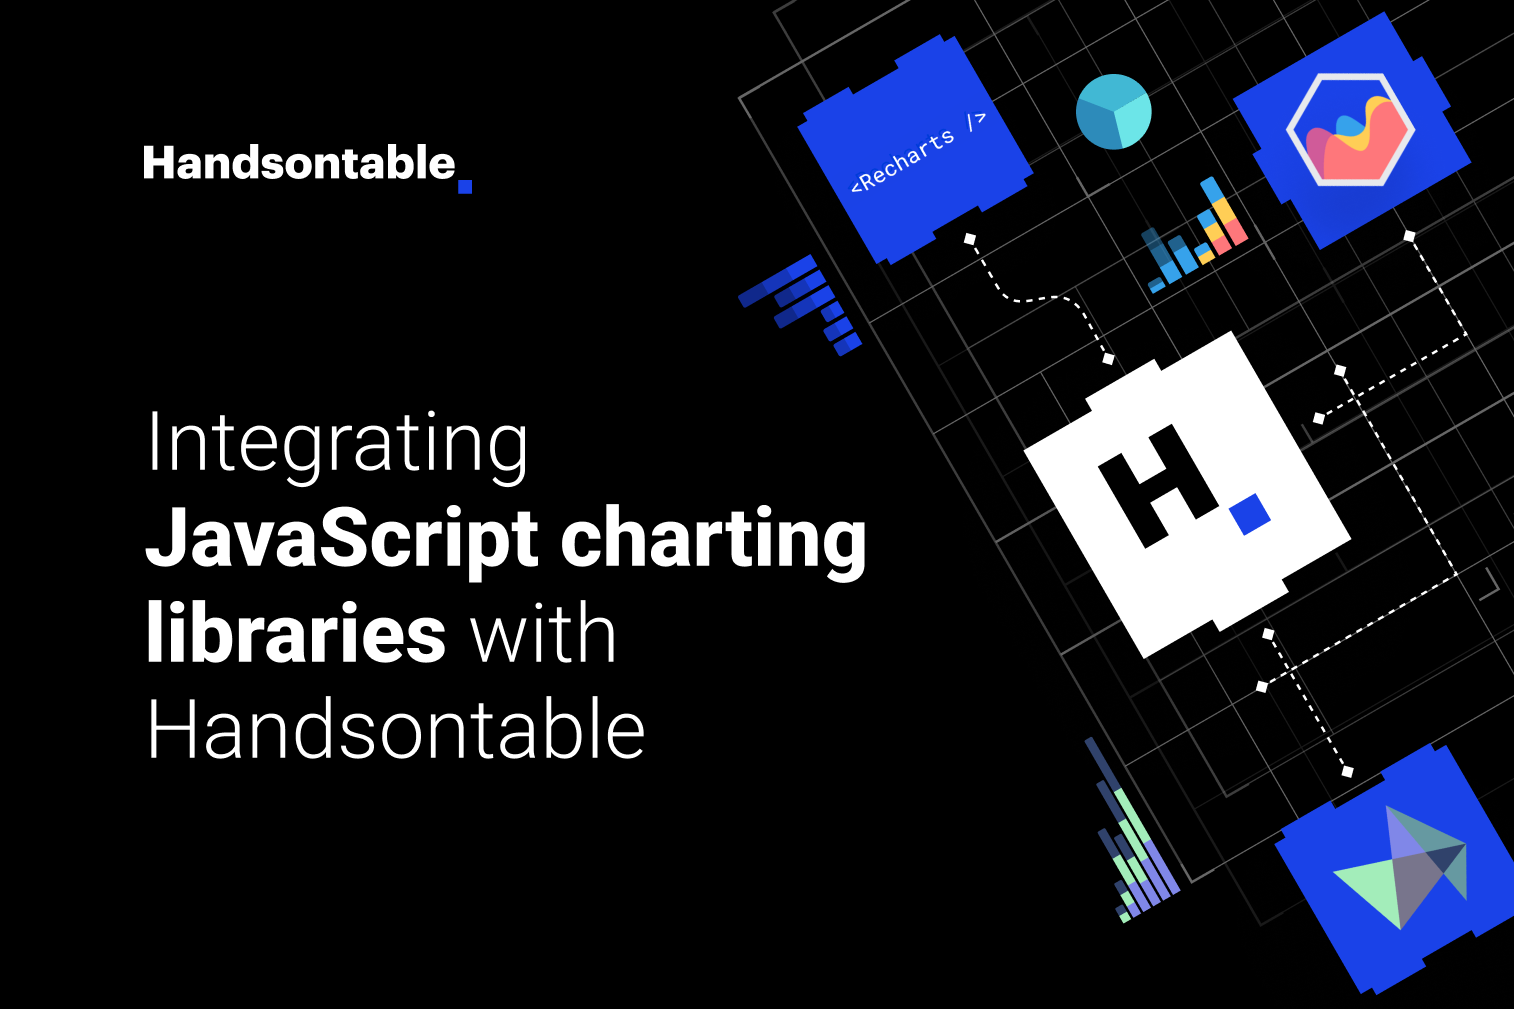 Integrating JavaScript charting libraries with Handsontable